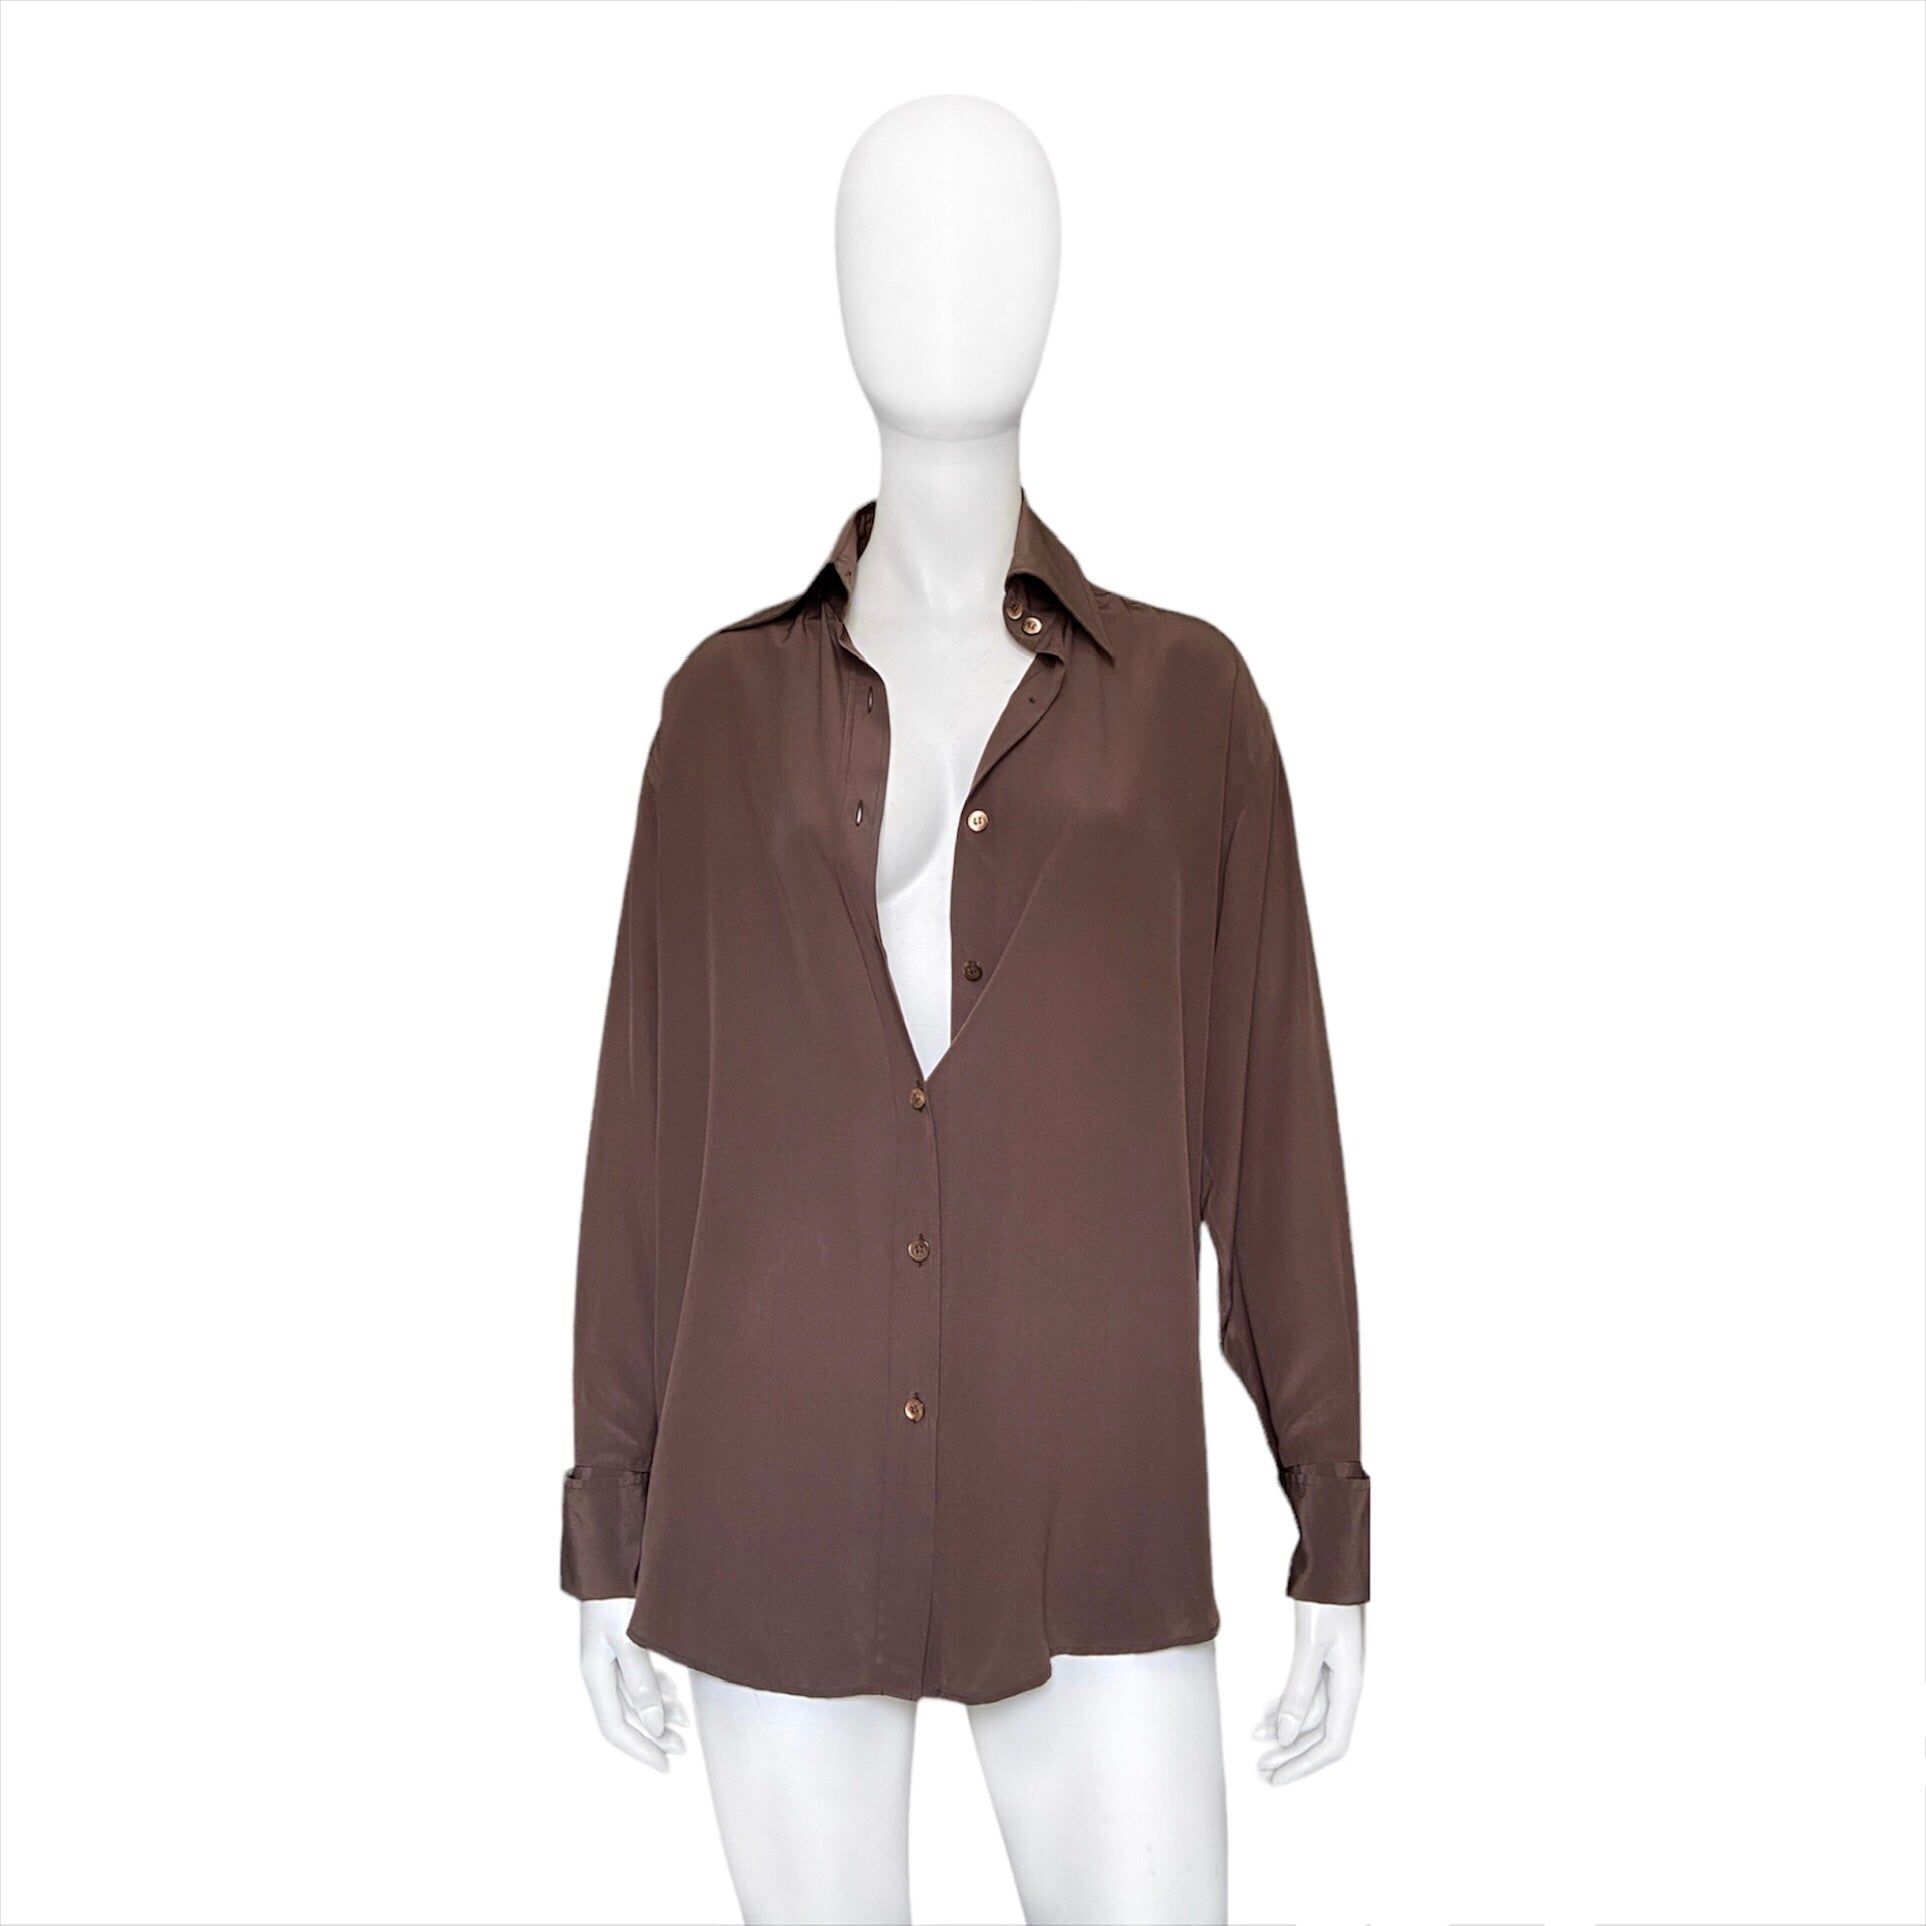 Gucci spring 1997 tom ford brown silk shirt 40 – Dusty Archive